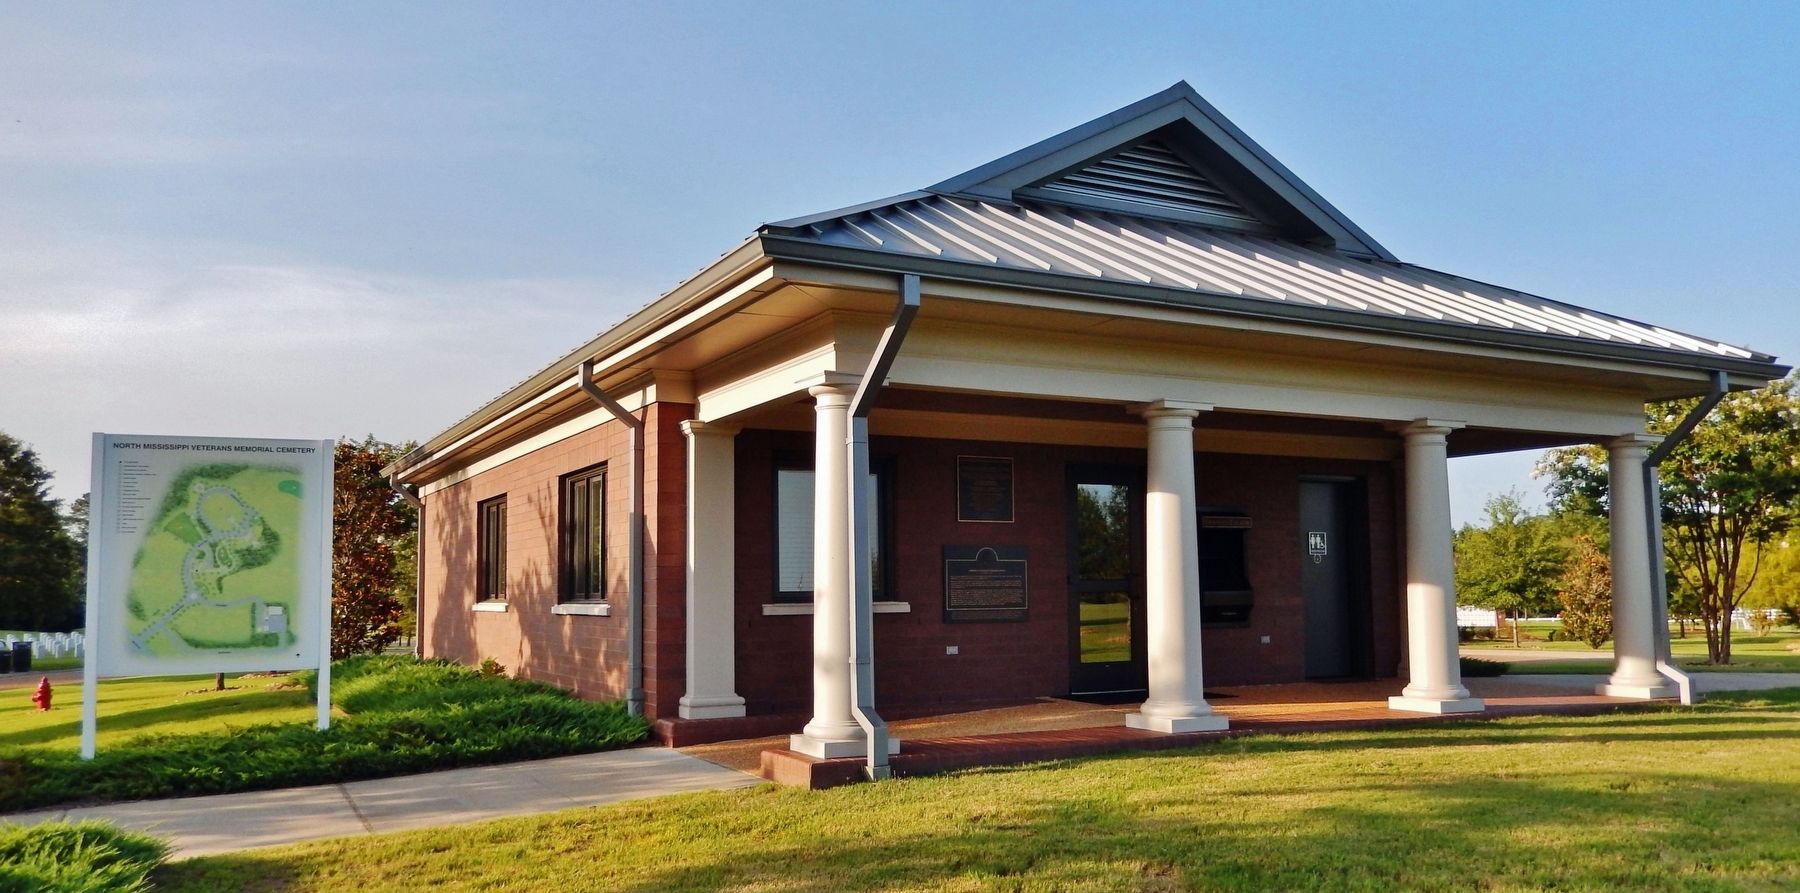 North Mississippi Veterans Memorial Cemetery Visitor Center image. Click for full size.